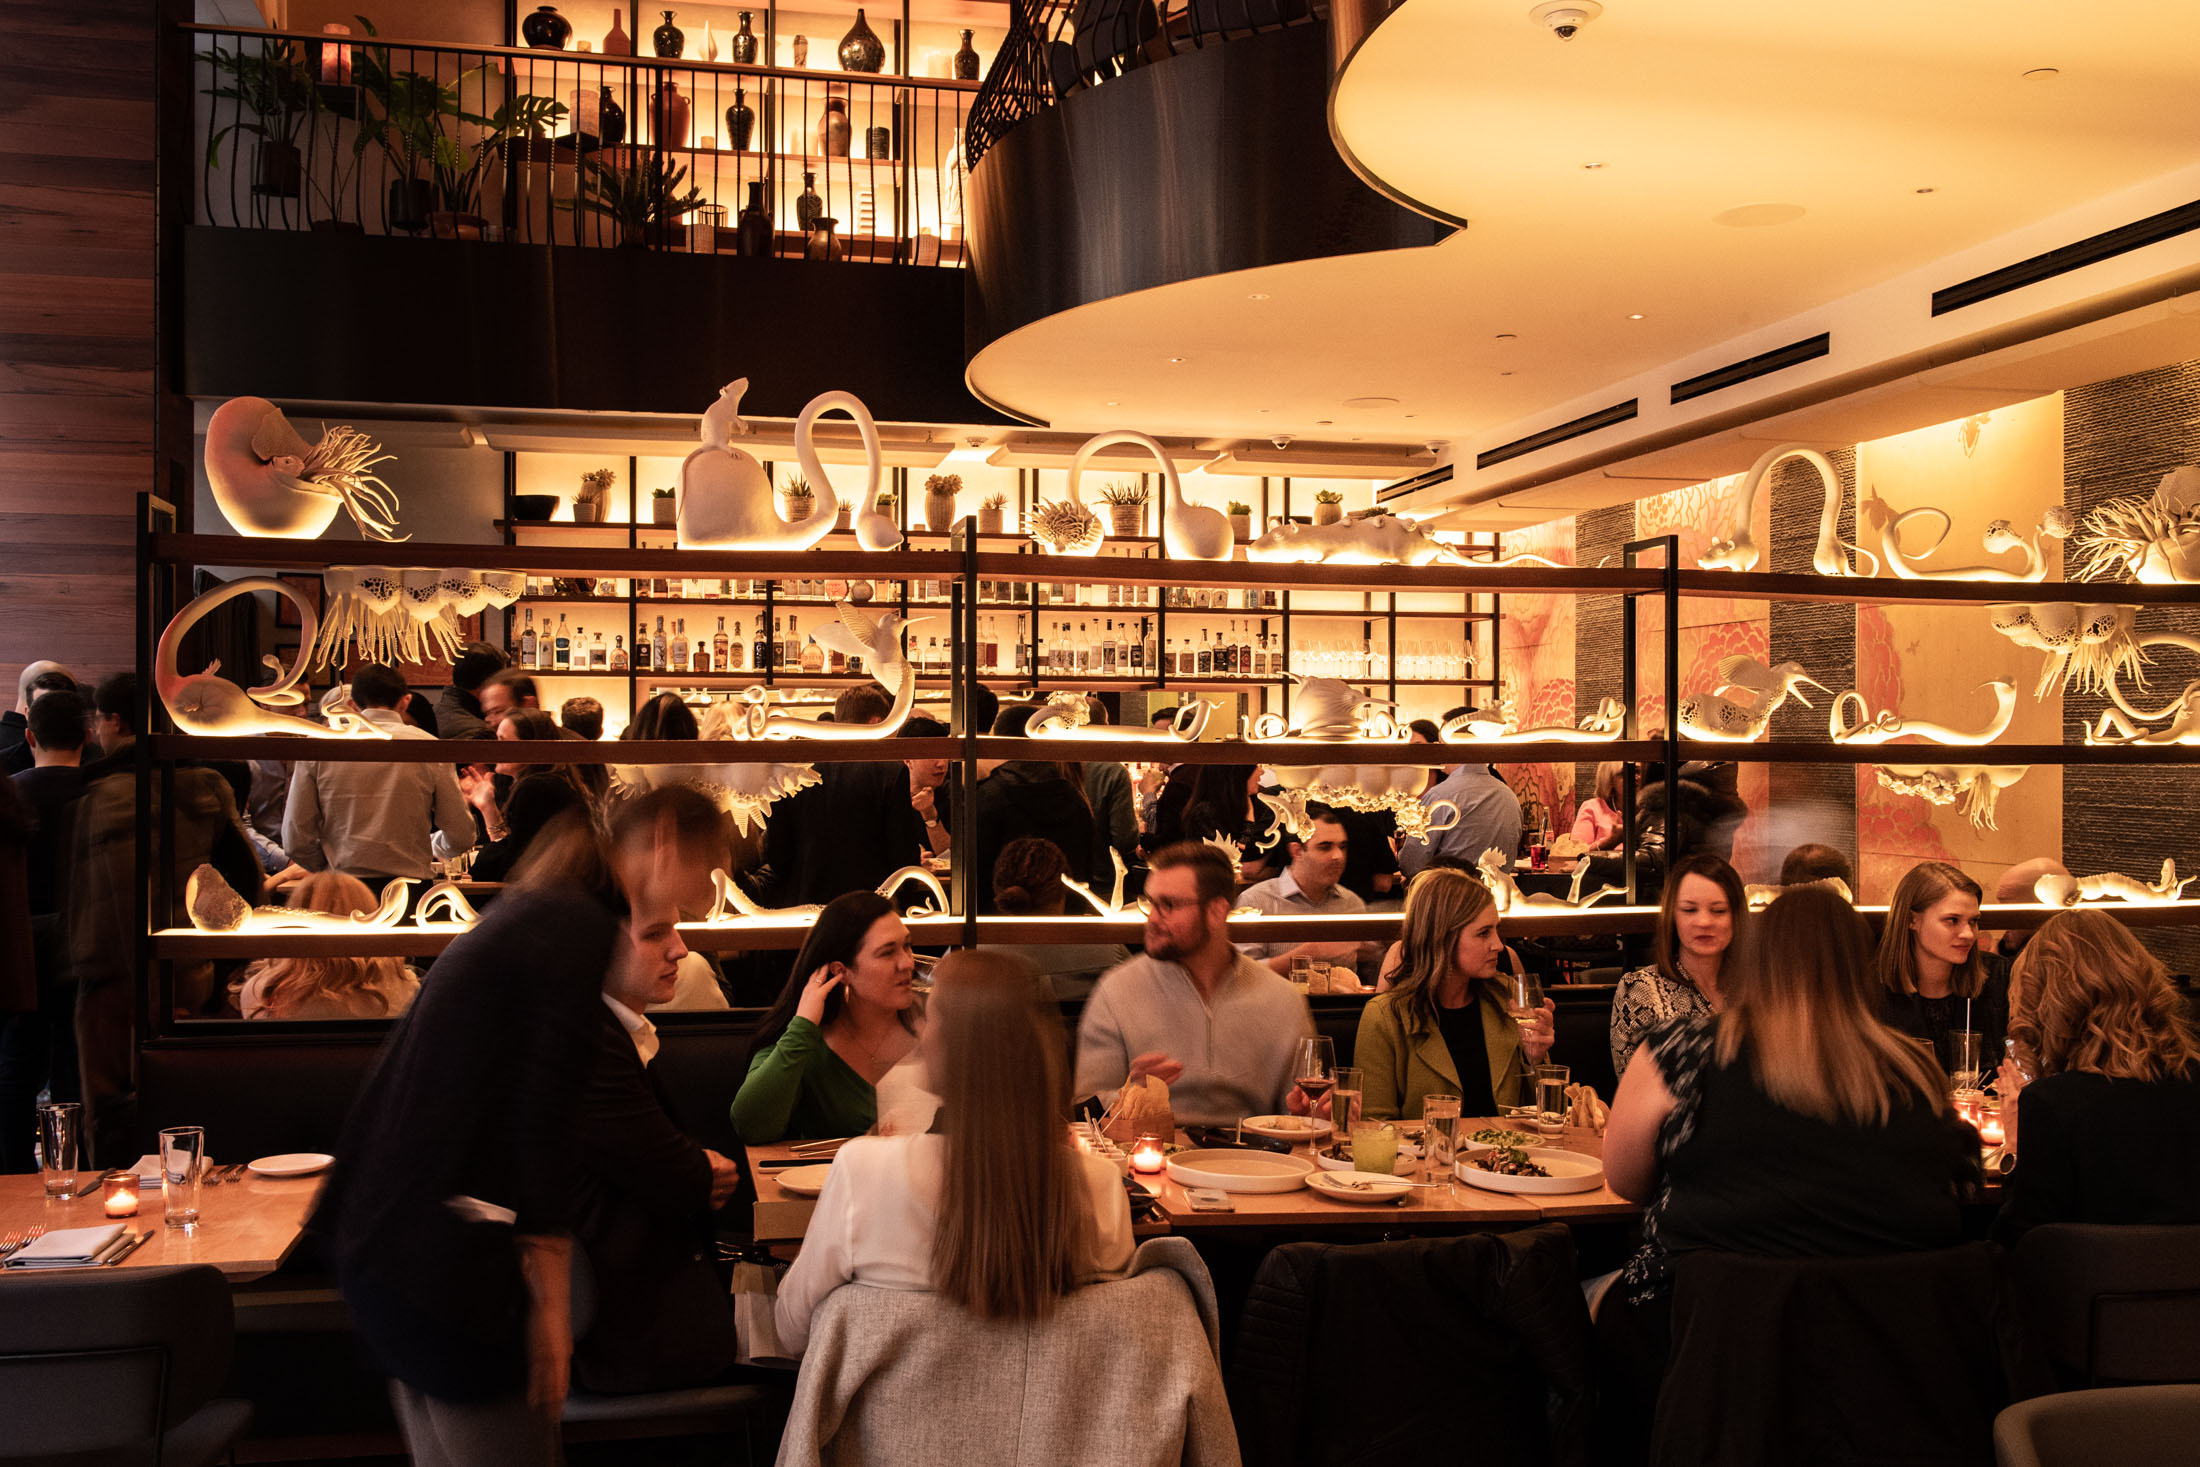 A midday crowd at Empellon in midtown Manhattan.